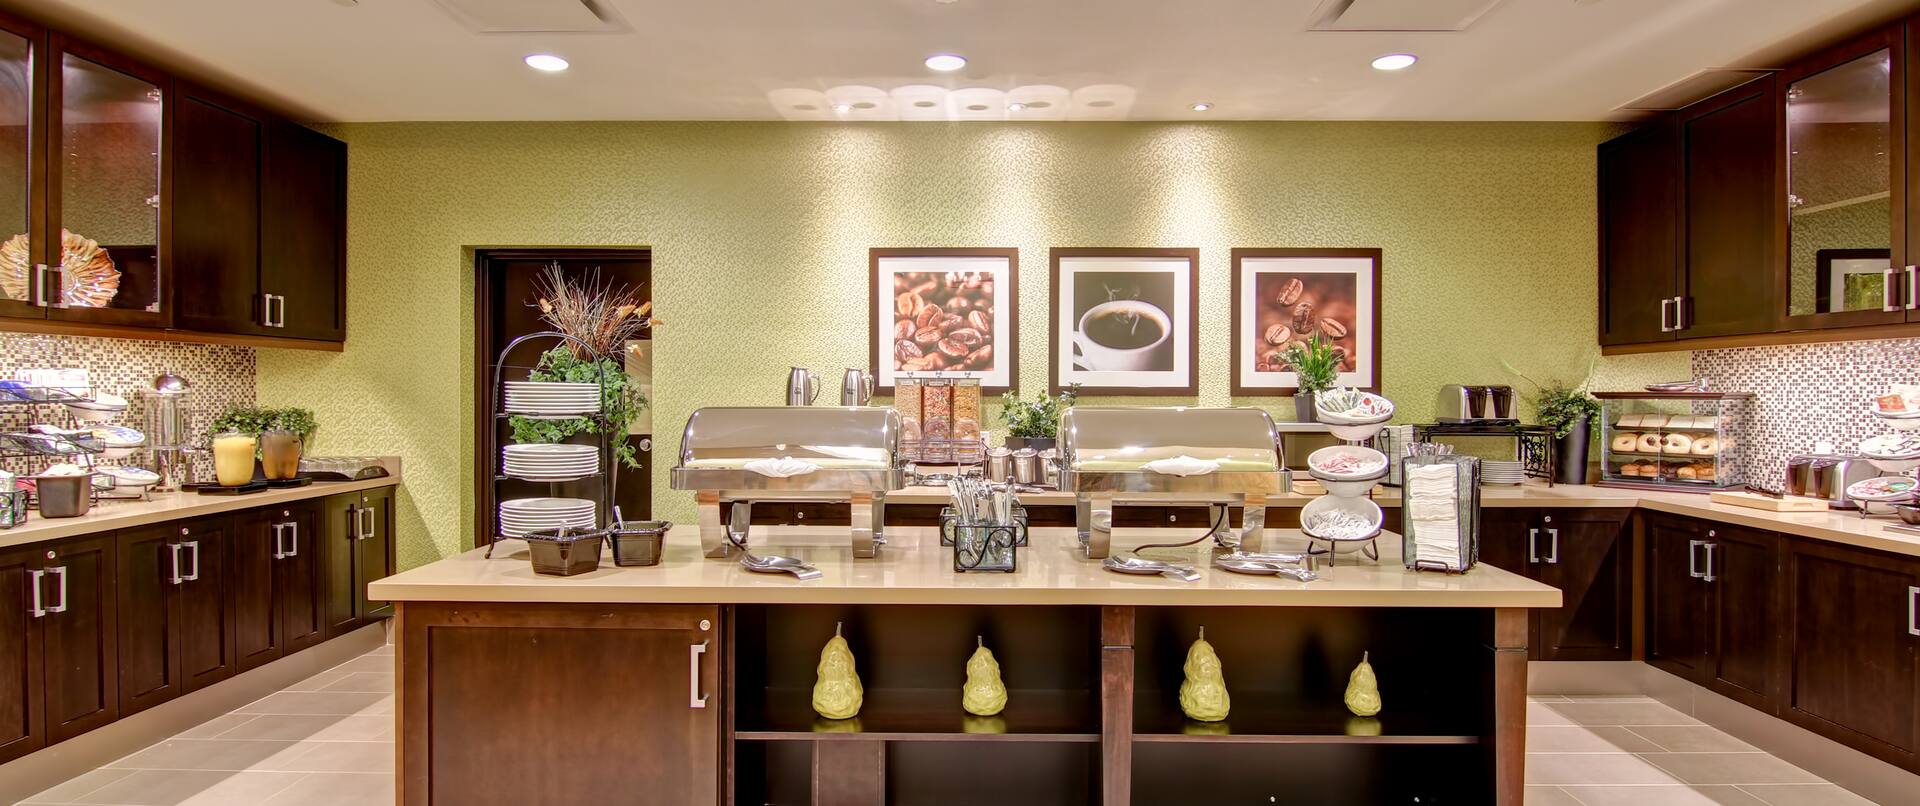 Plates, Utensils, Food, and Condiments on Counters of Hotel Dining Area With Wood Cabinets and Wall Art